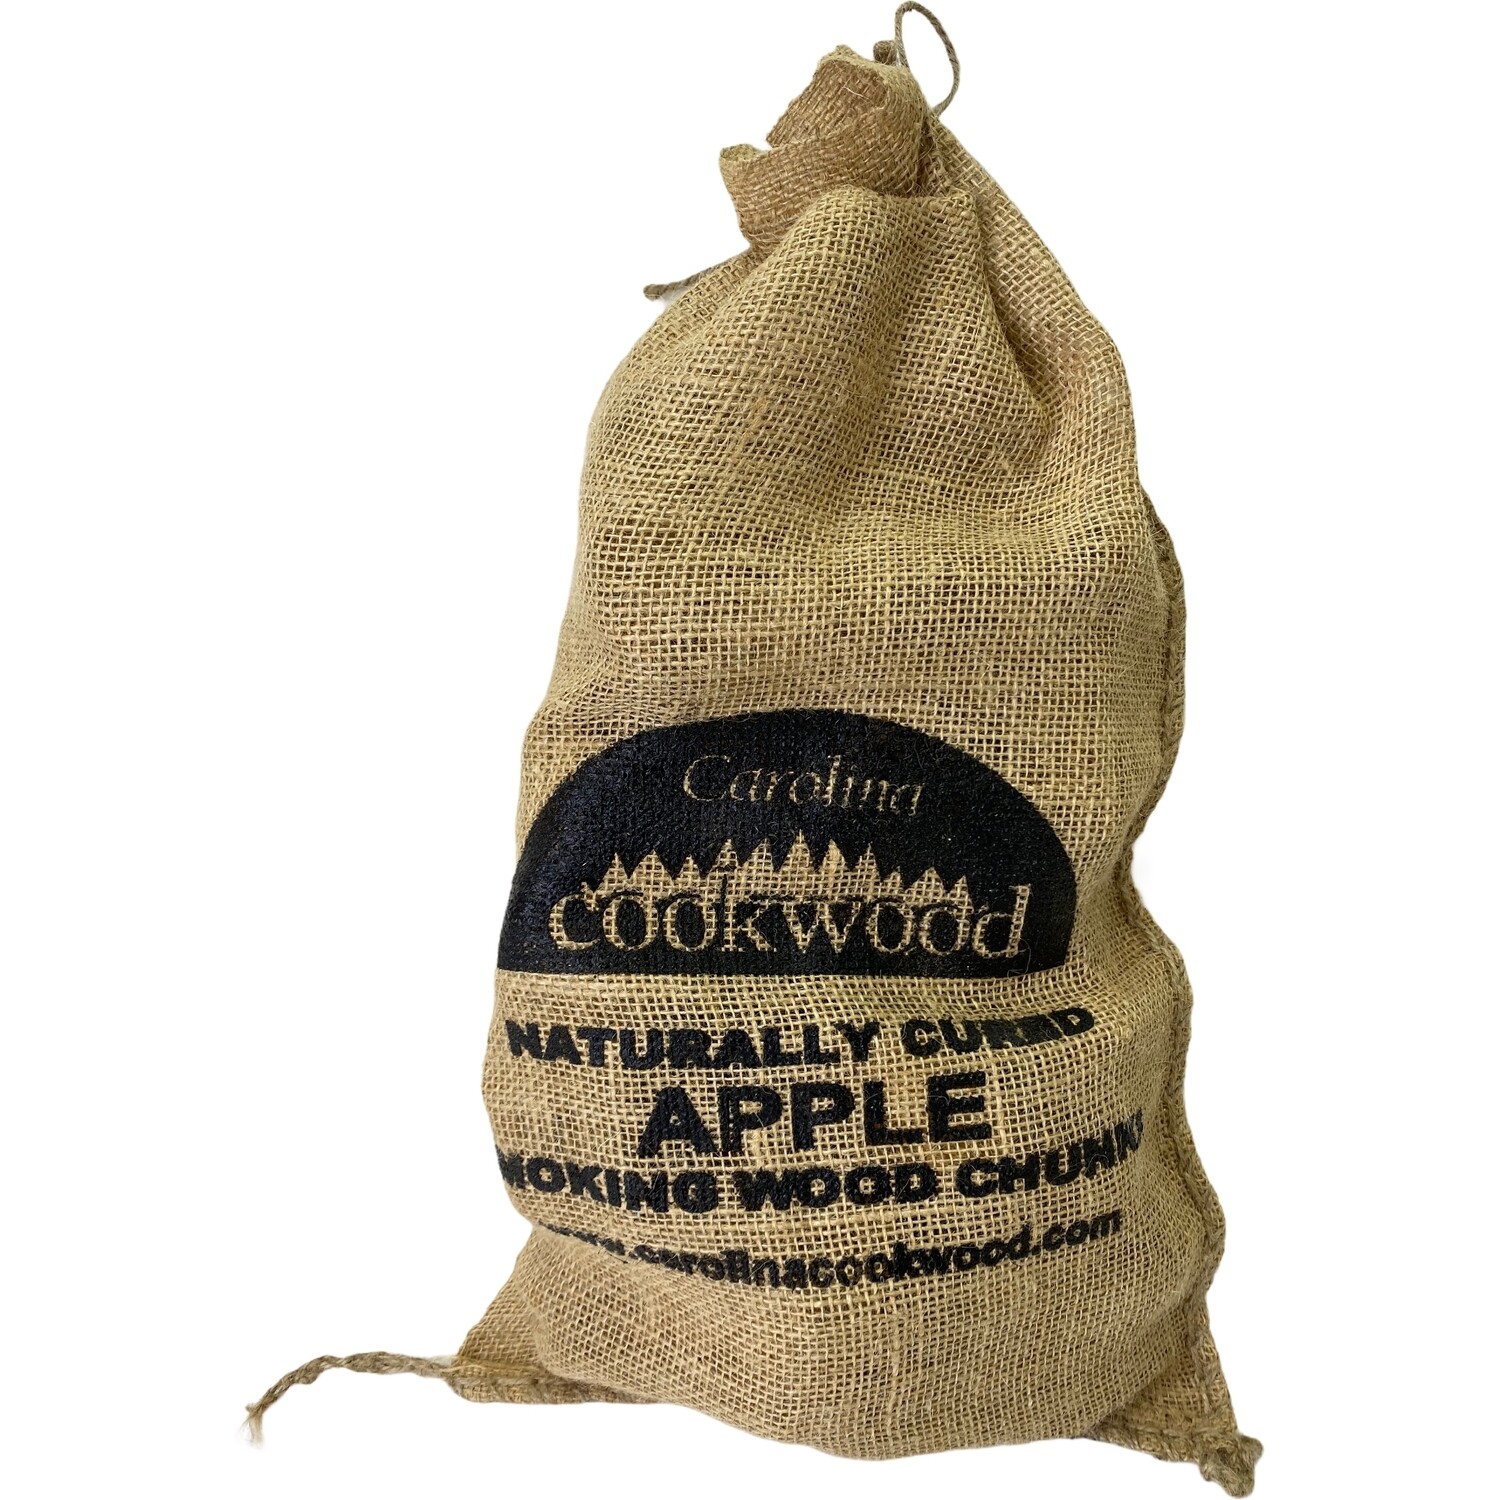 Carolina Cookwood Apple Wood Smoking Chunks for BBQ Meat Brisket Ribs Chicken Turkey and More